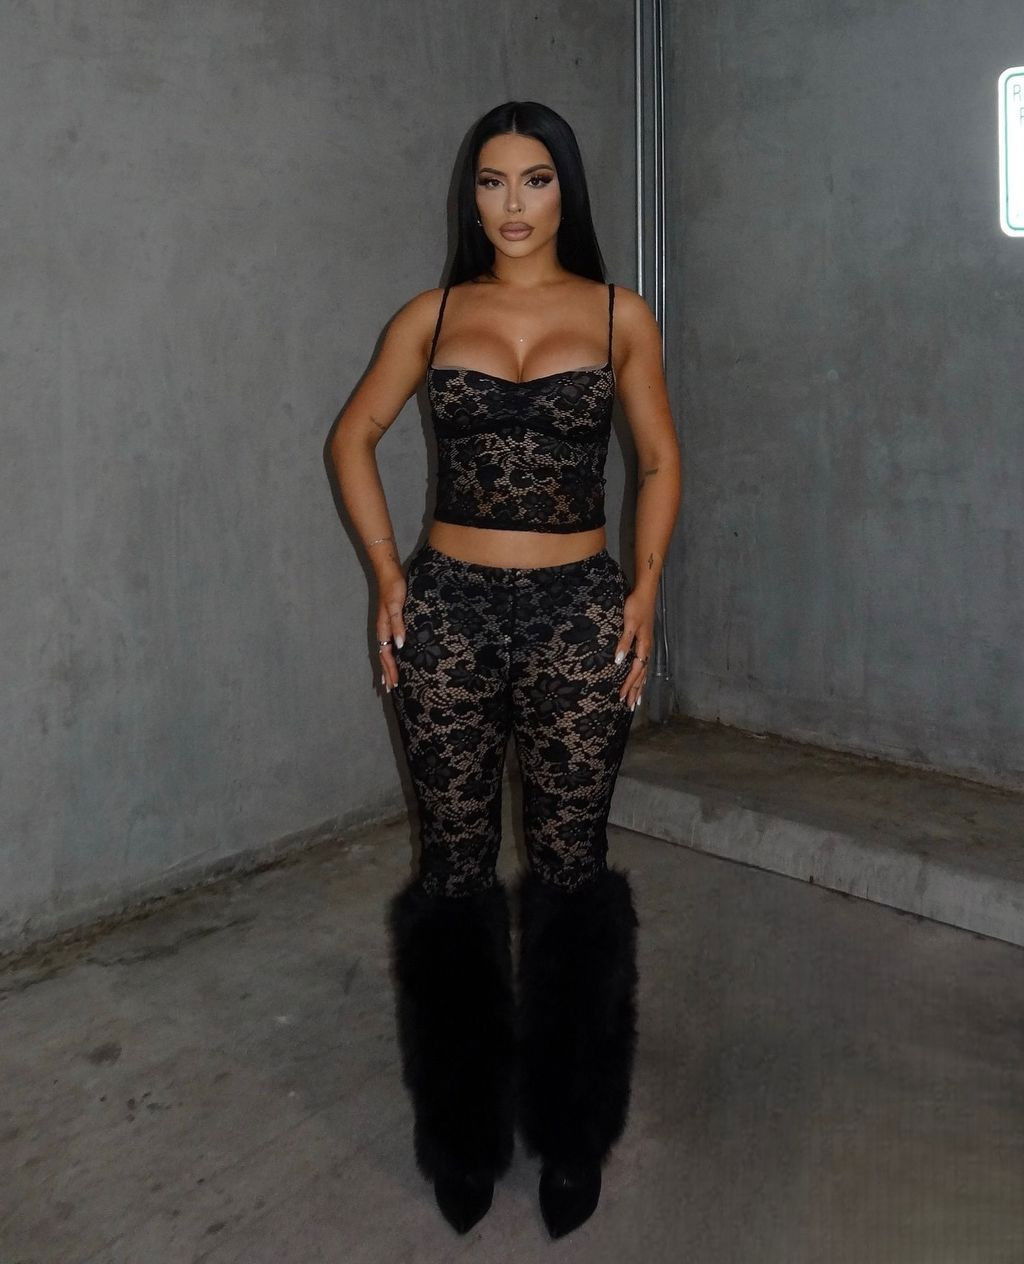 Photo shared by FashionNova.com on July 25, 2024 tagging @fashionnova, and @wowval_. May be an image of 1 person, makeup, fur and fishnet stockings.